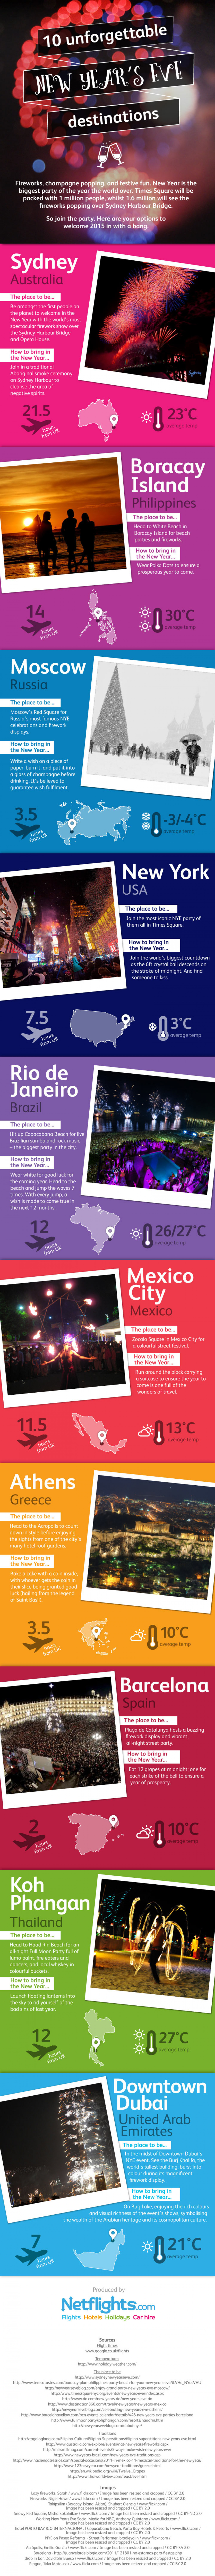 10 Unforgettable New Year’s Eve Destinations Infographic